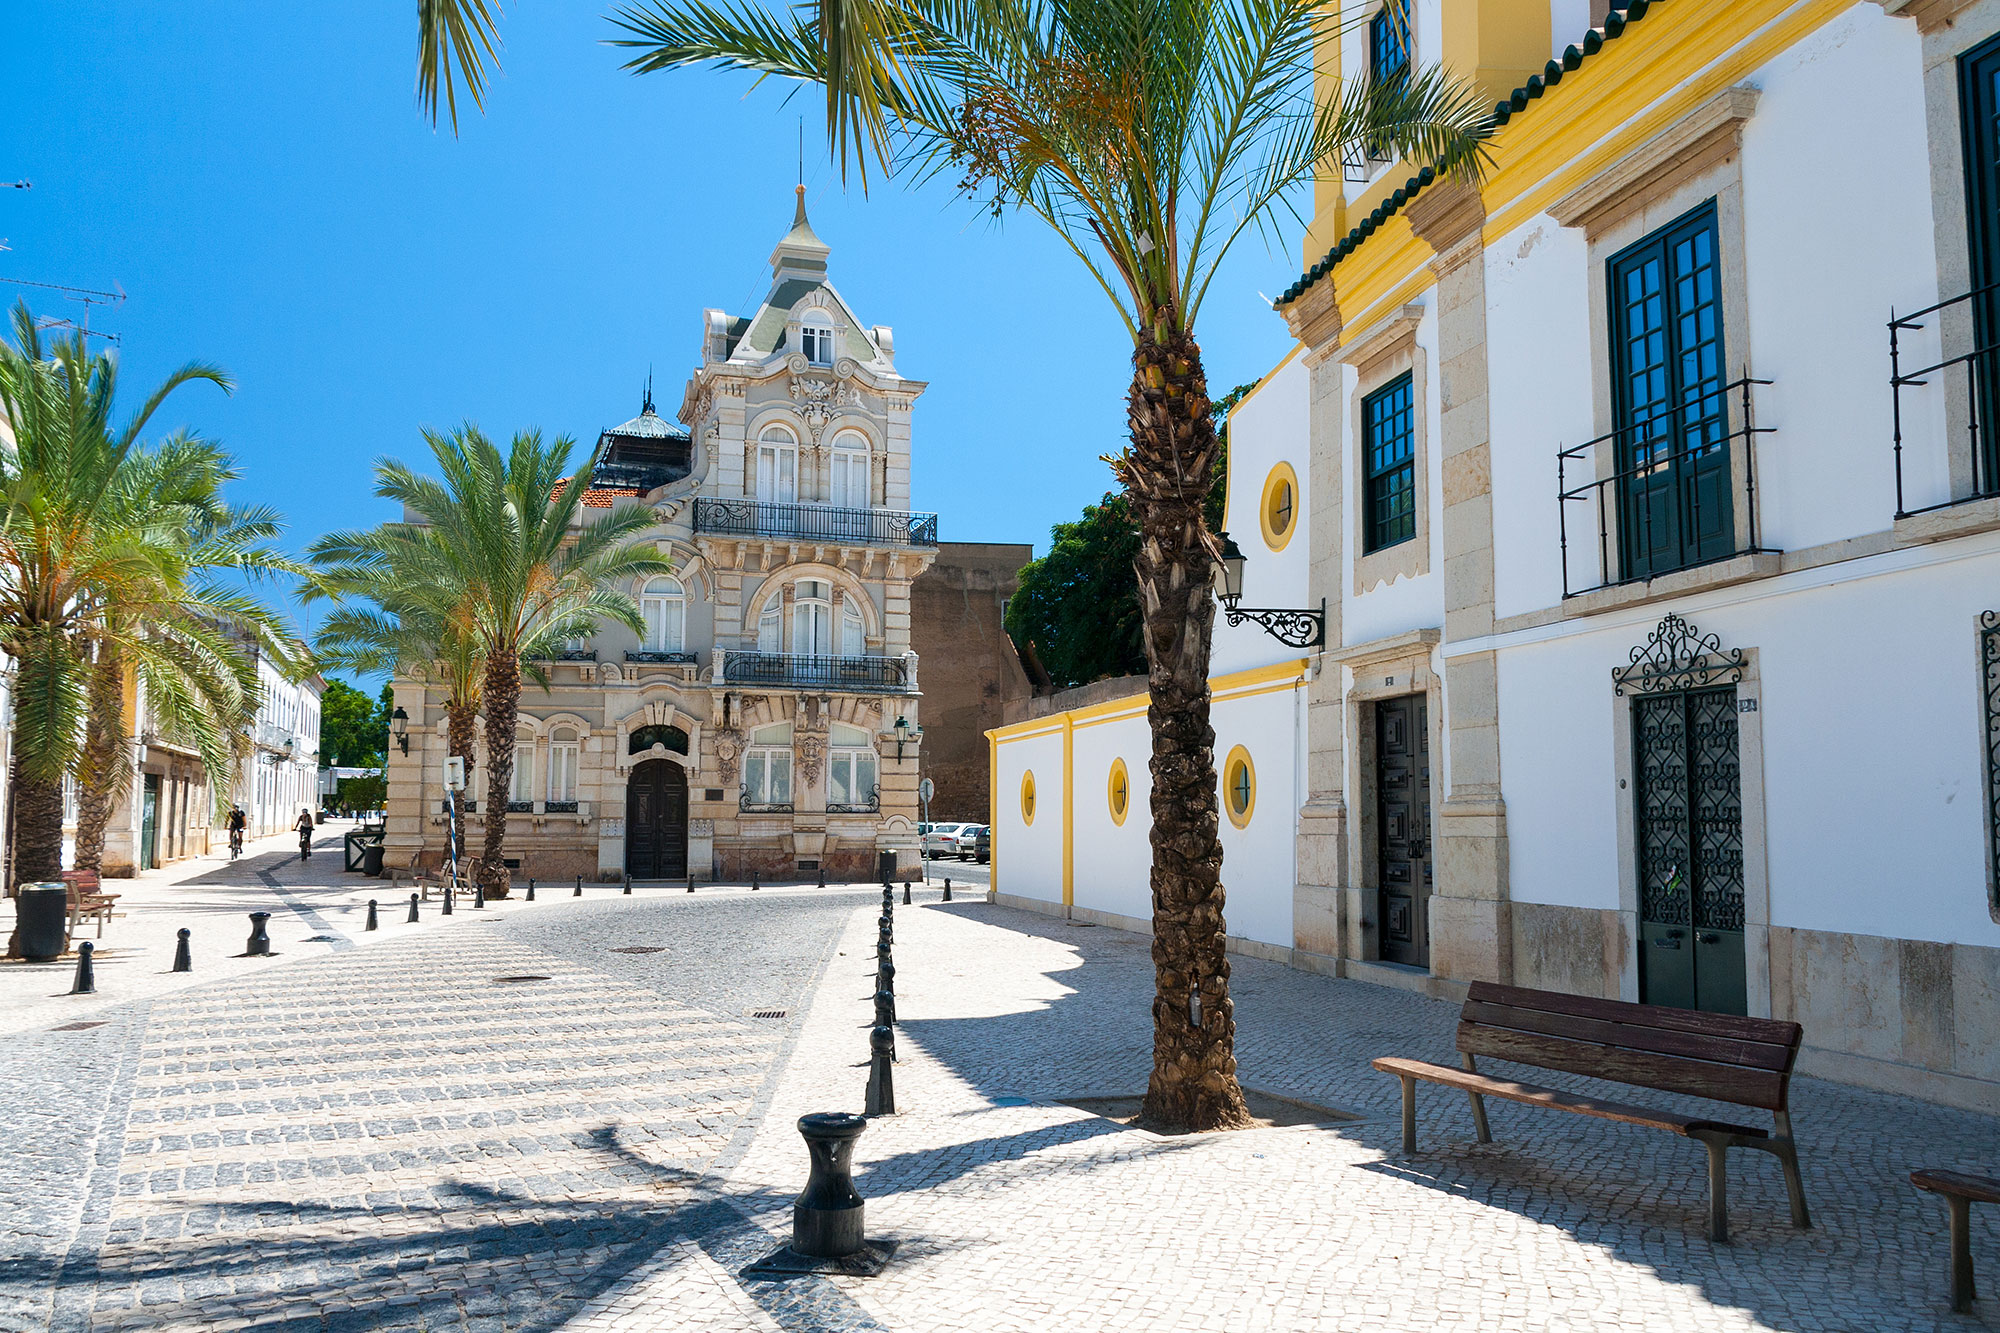 8-ways-how-to-get-from-lisbon-to-faro-or-faro-to-lisbon-traveller